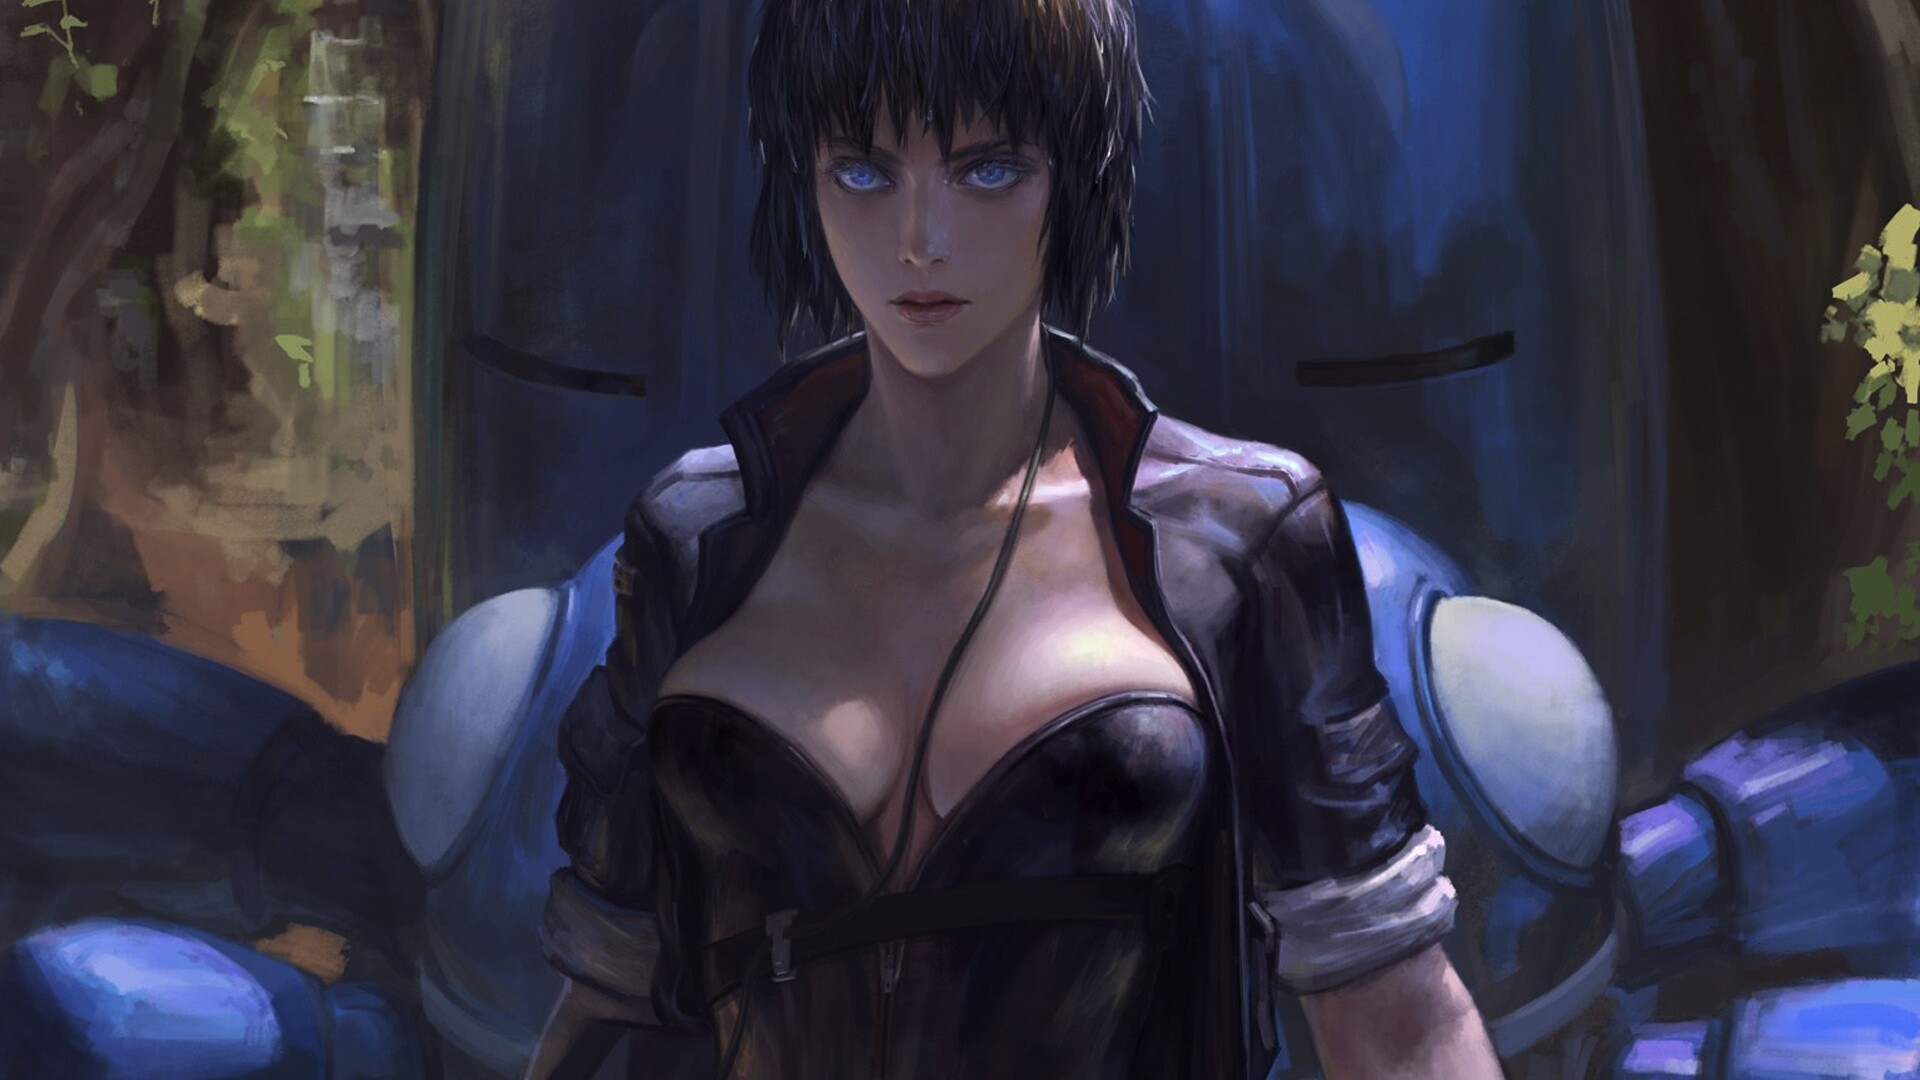 Ghost in the Shell (Anime): Major Motoko Kusanagi, The fictional character, The leading protagonist, An acting officer, A cyborg. 1920x1080 Full HD Background.